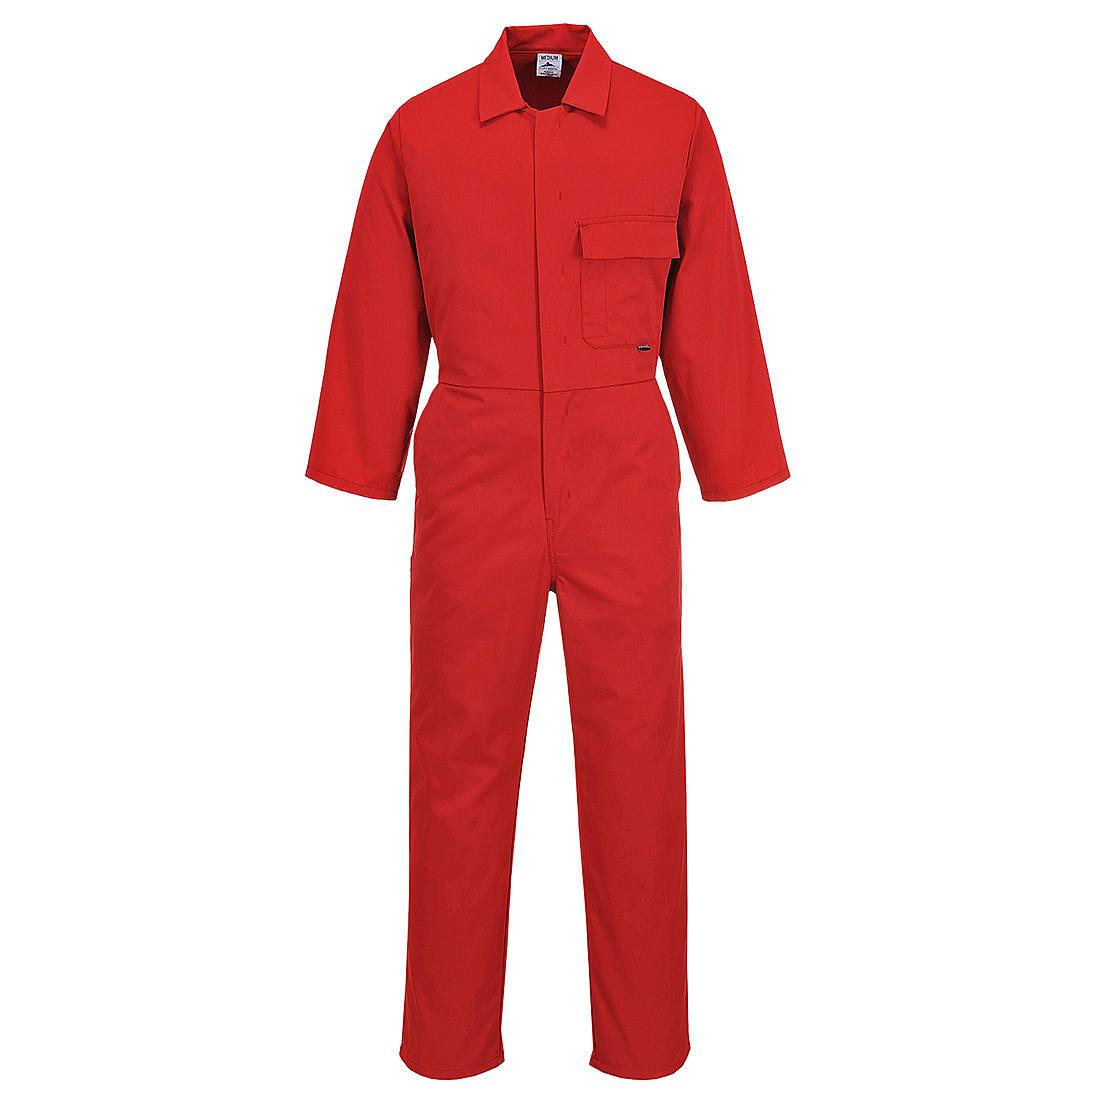 Portwest C802 Standard Coverall in Red (Product Code: C802)